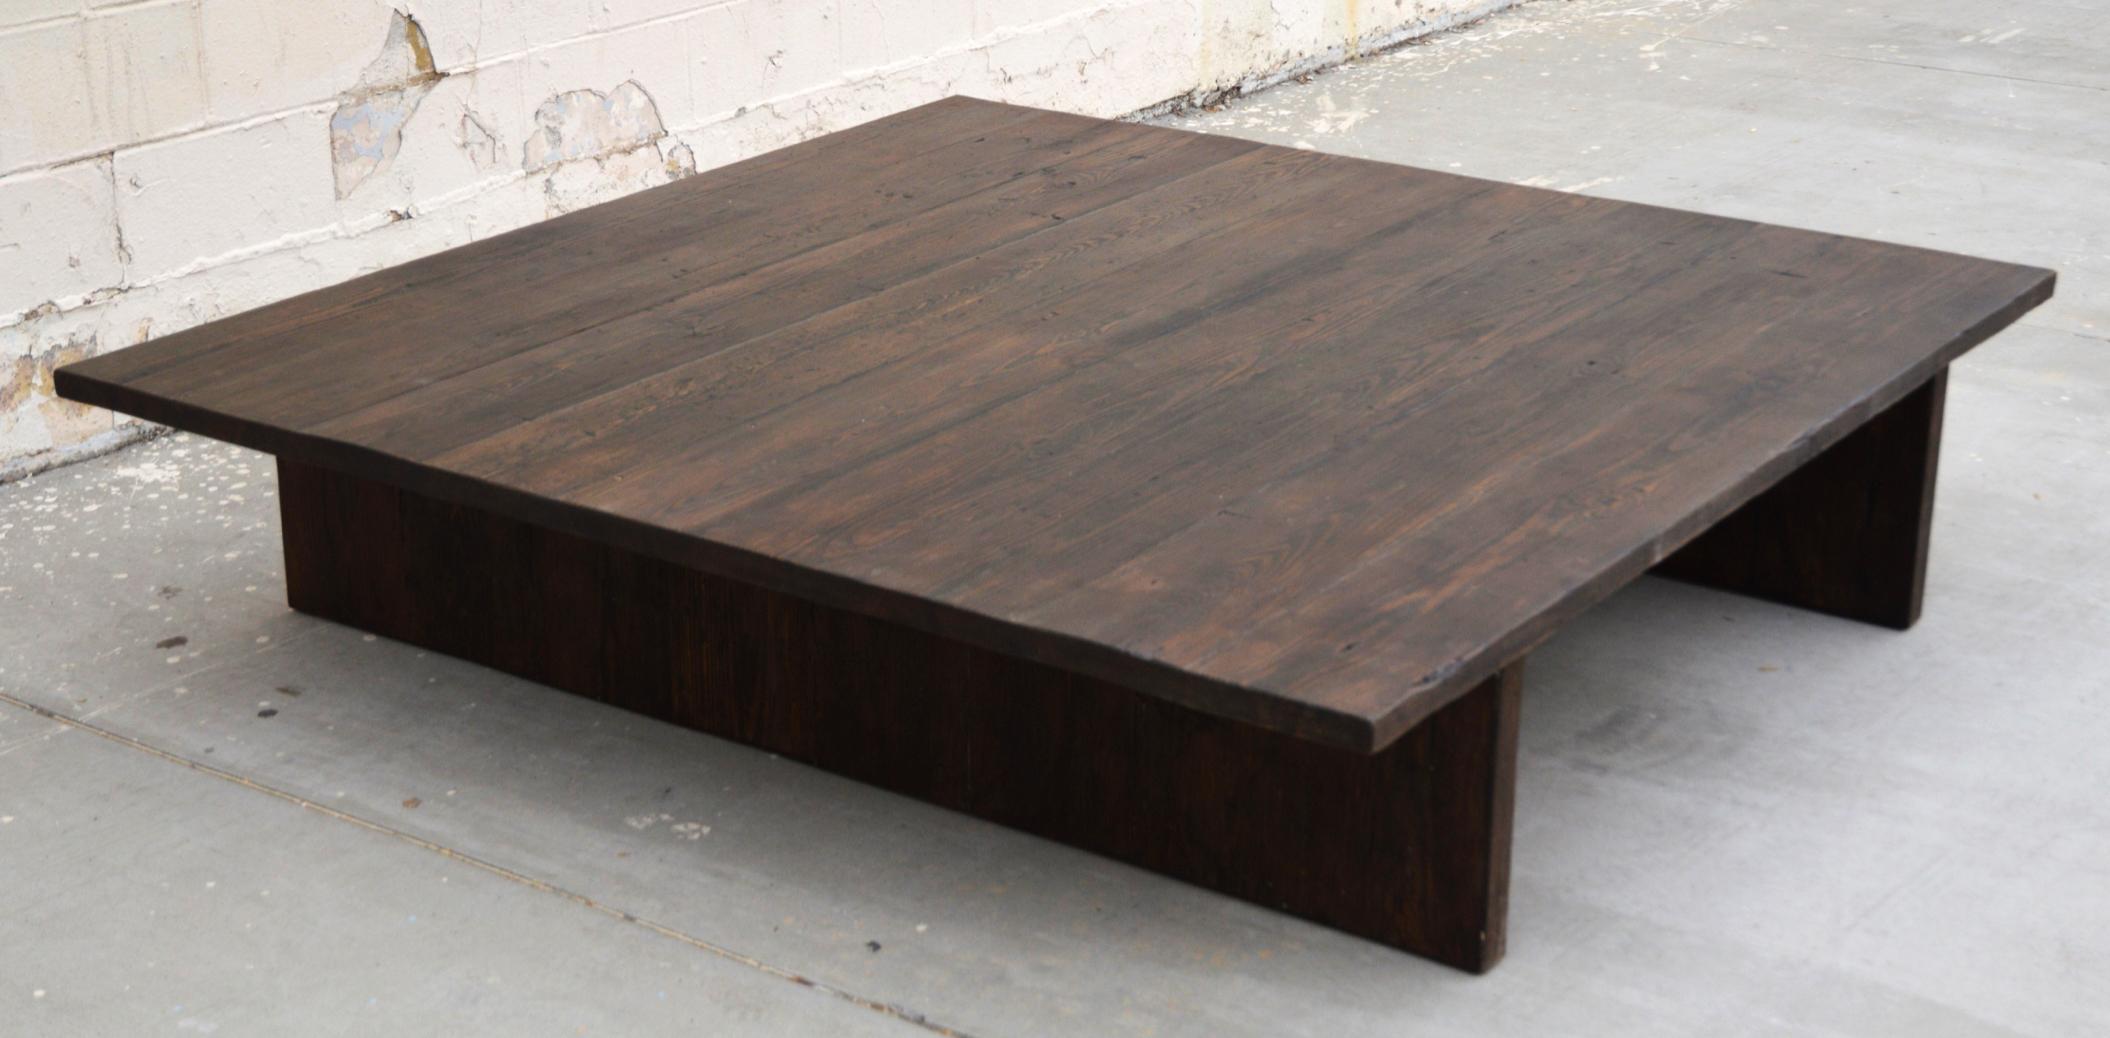 This reclaimed pine coffee table is seen here in 60